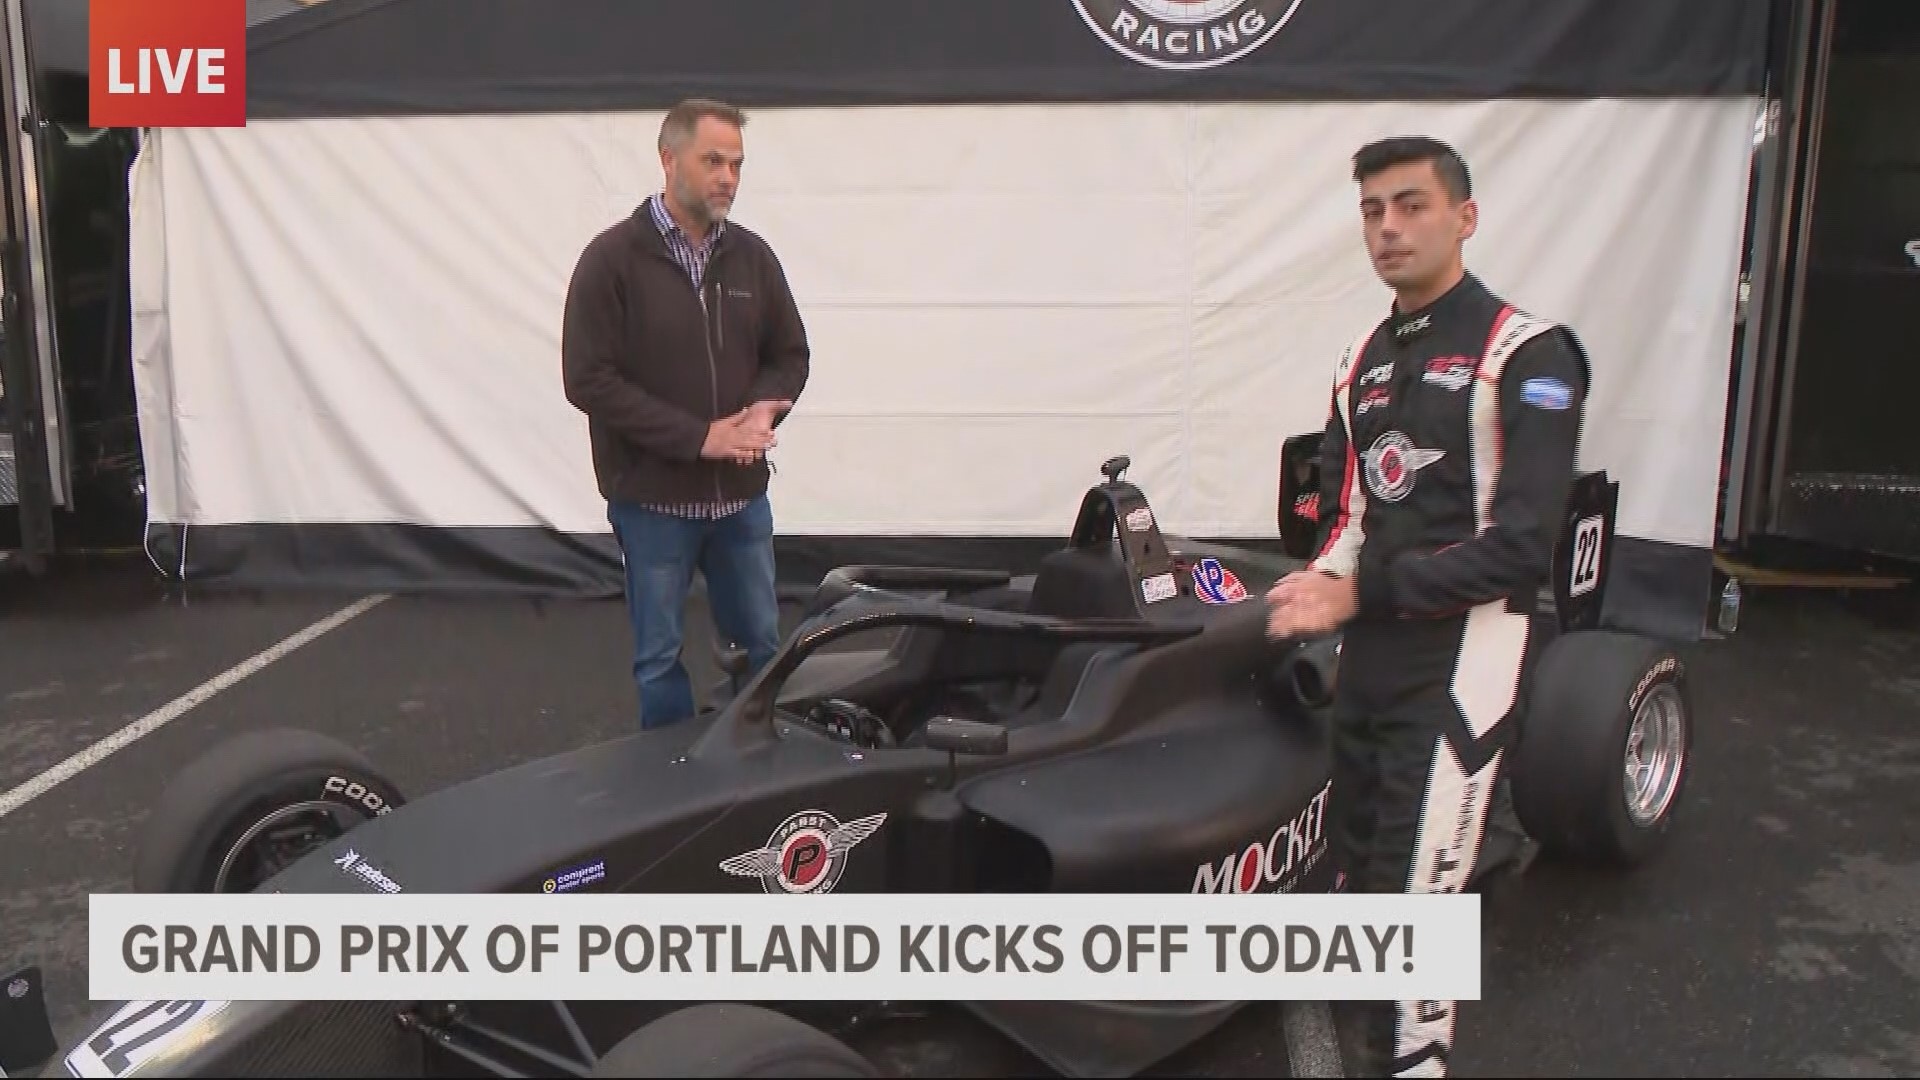 Devon Haskins talks to the VP and GM Grand Prix of Portland Jerry Jansen and USF2000 driver Simon Sikes